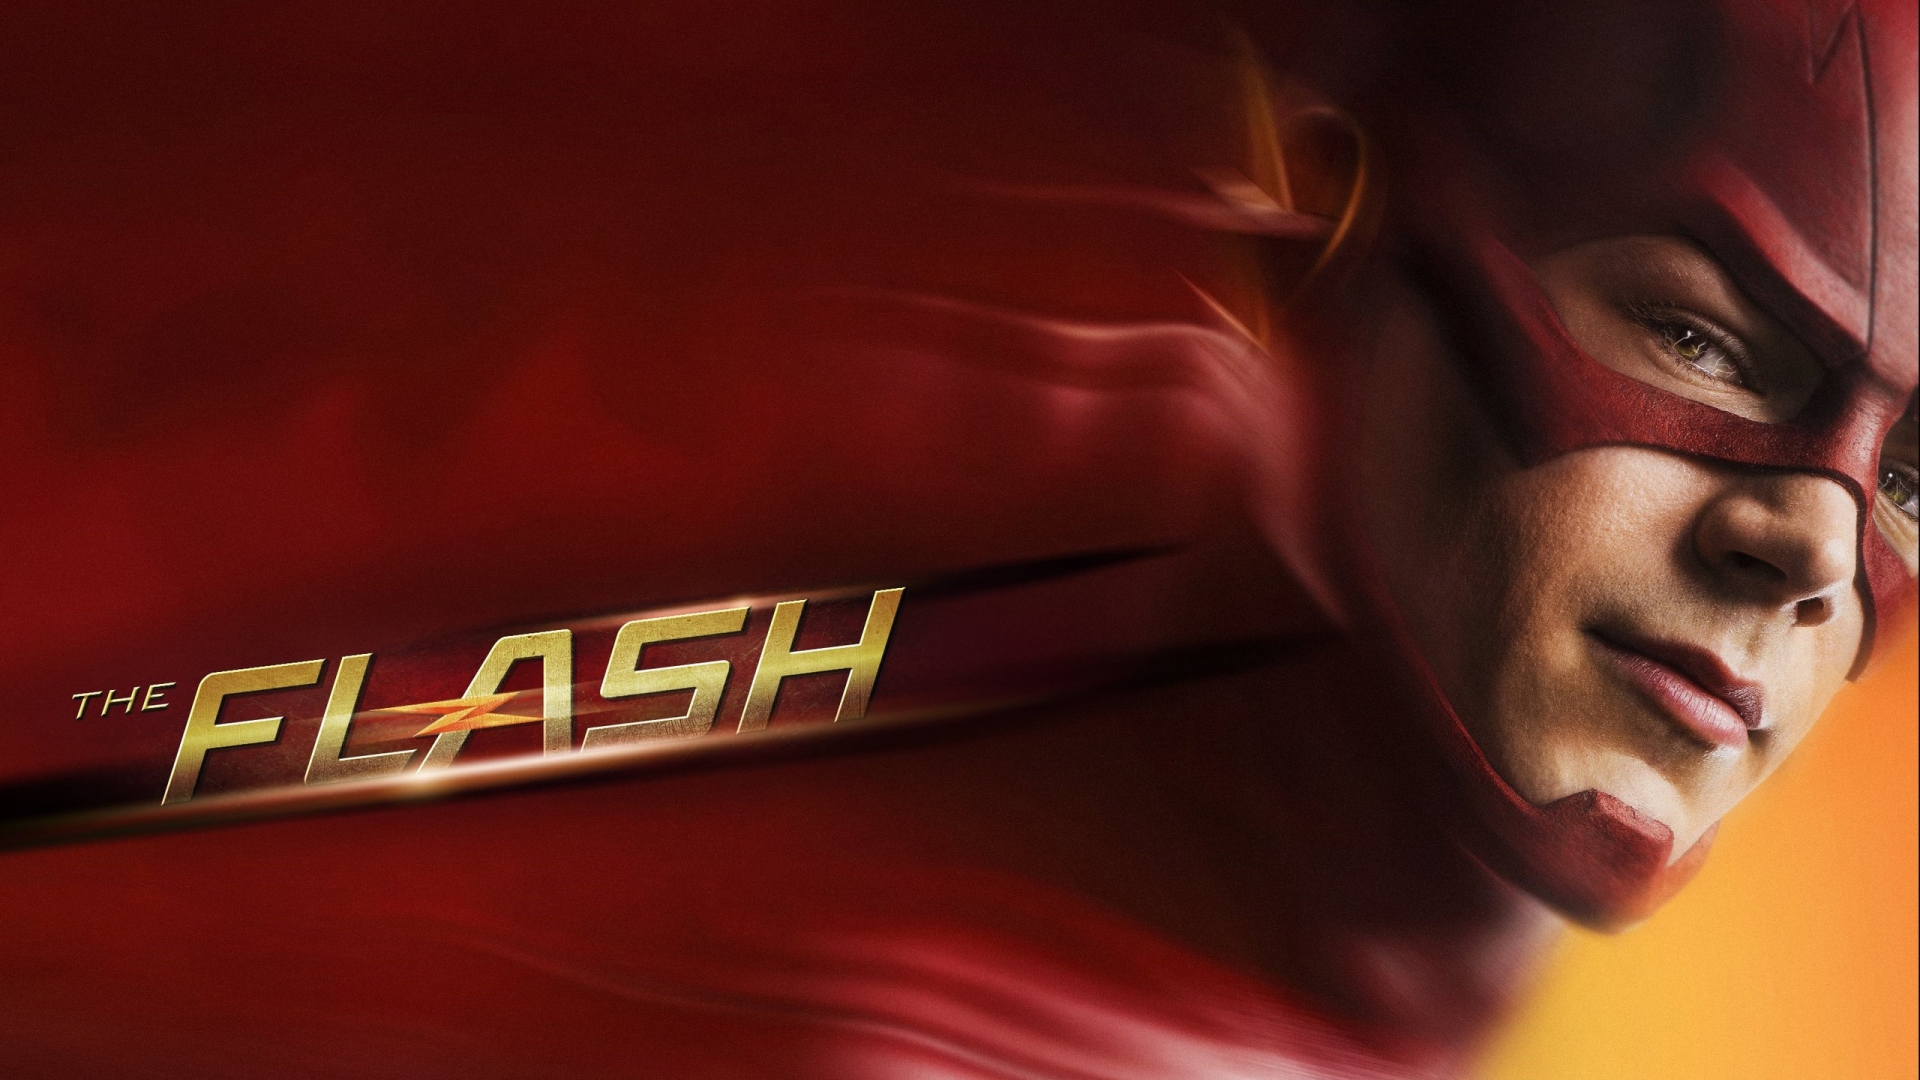 The Flash TV Series for 1920 x 1080 HDTV 1080p resolution